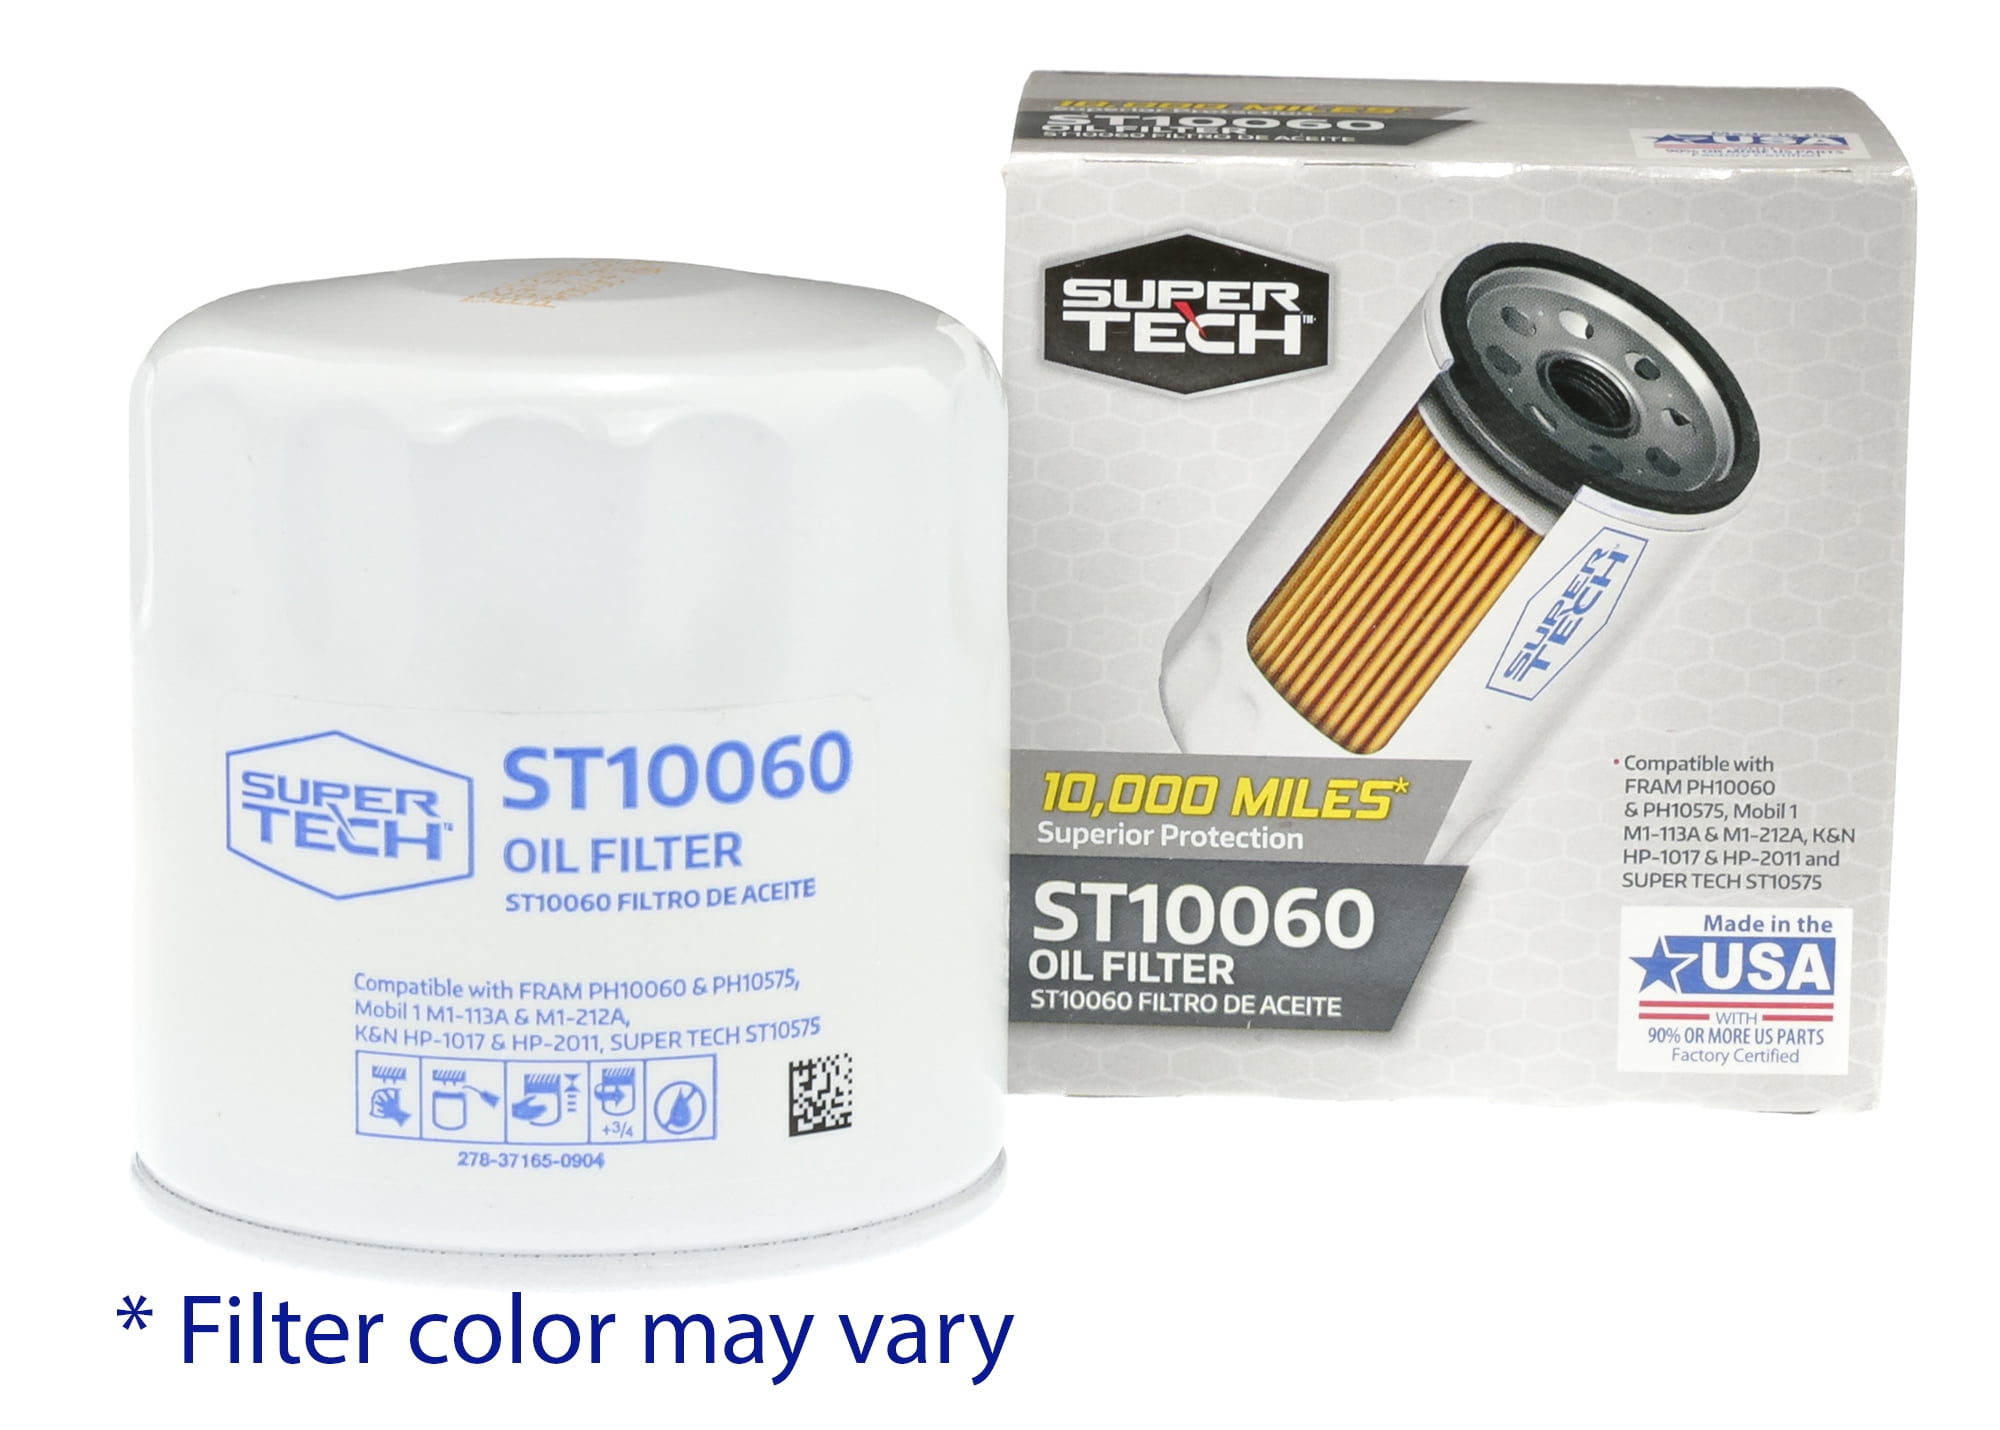 SuperTech ST10060 10K mile Oil Filter, Fits Buick, Cadillac, Chevrolet, GMC, Chrysler, Dodge and Jeep Vehicles